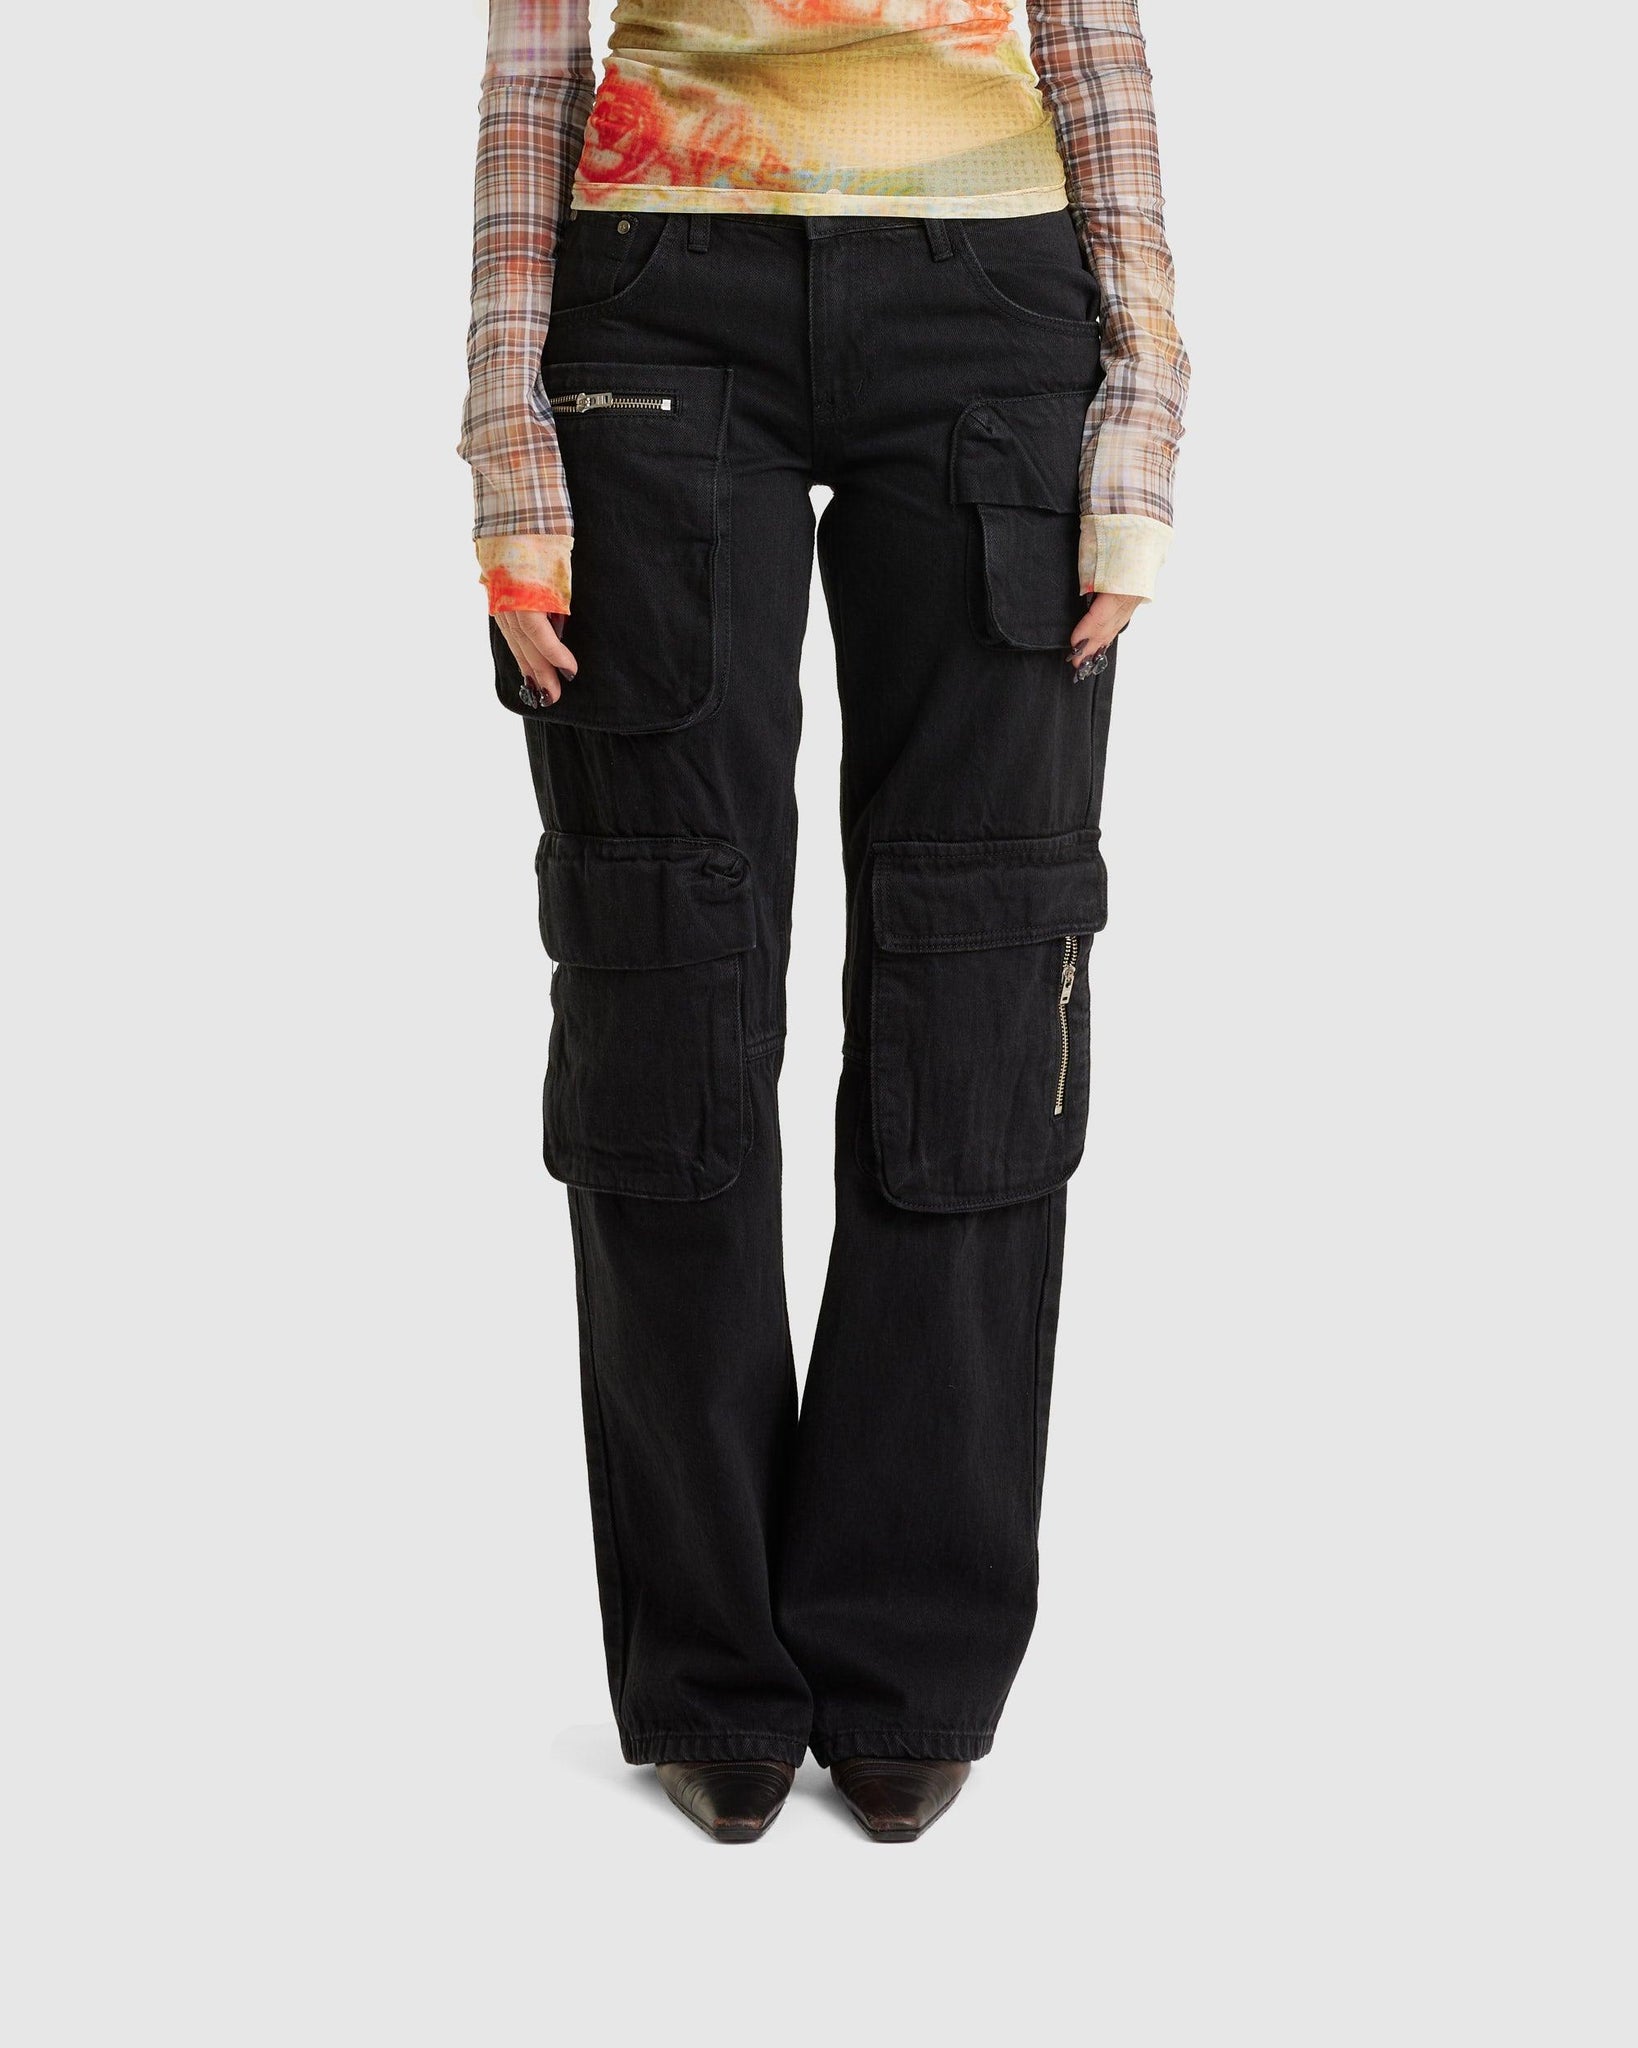 Woven Pocket Cargo Jean - {{ collection.title }} - Chinatown Country Club 